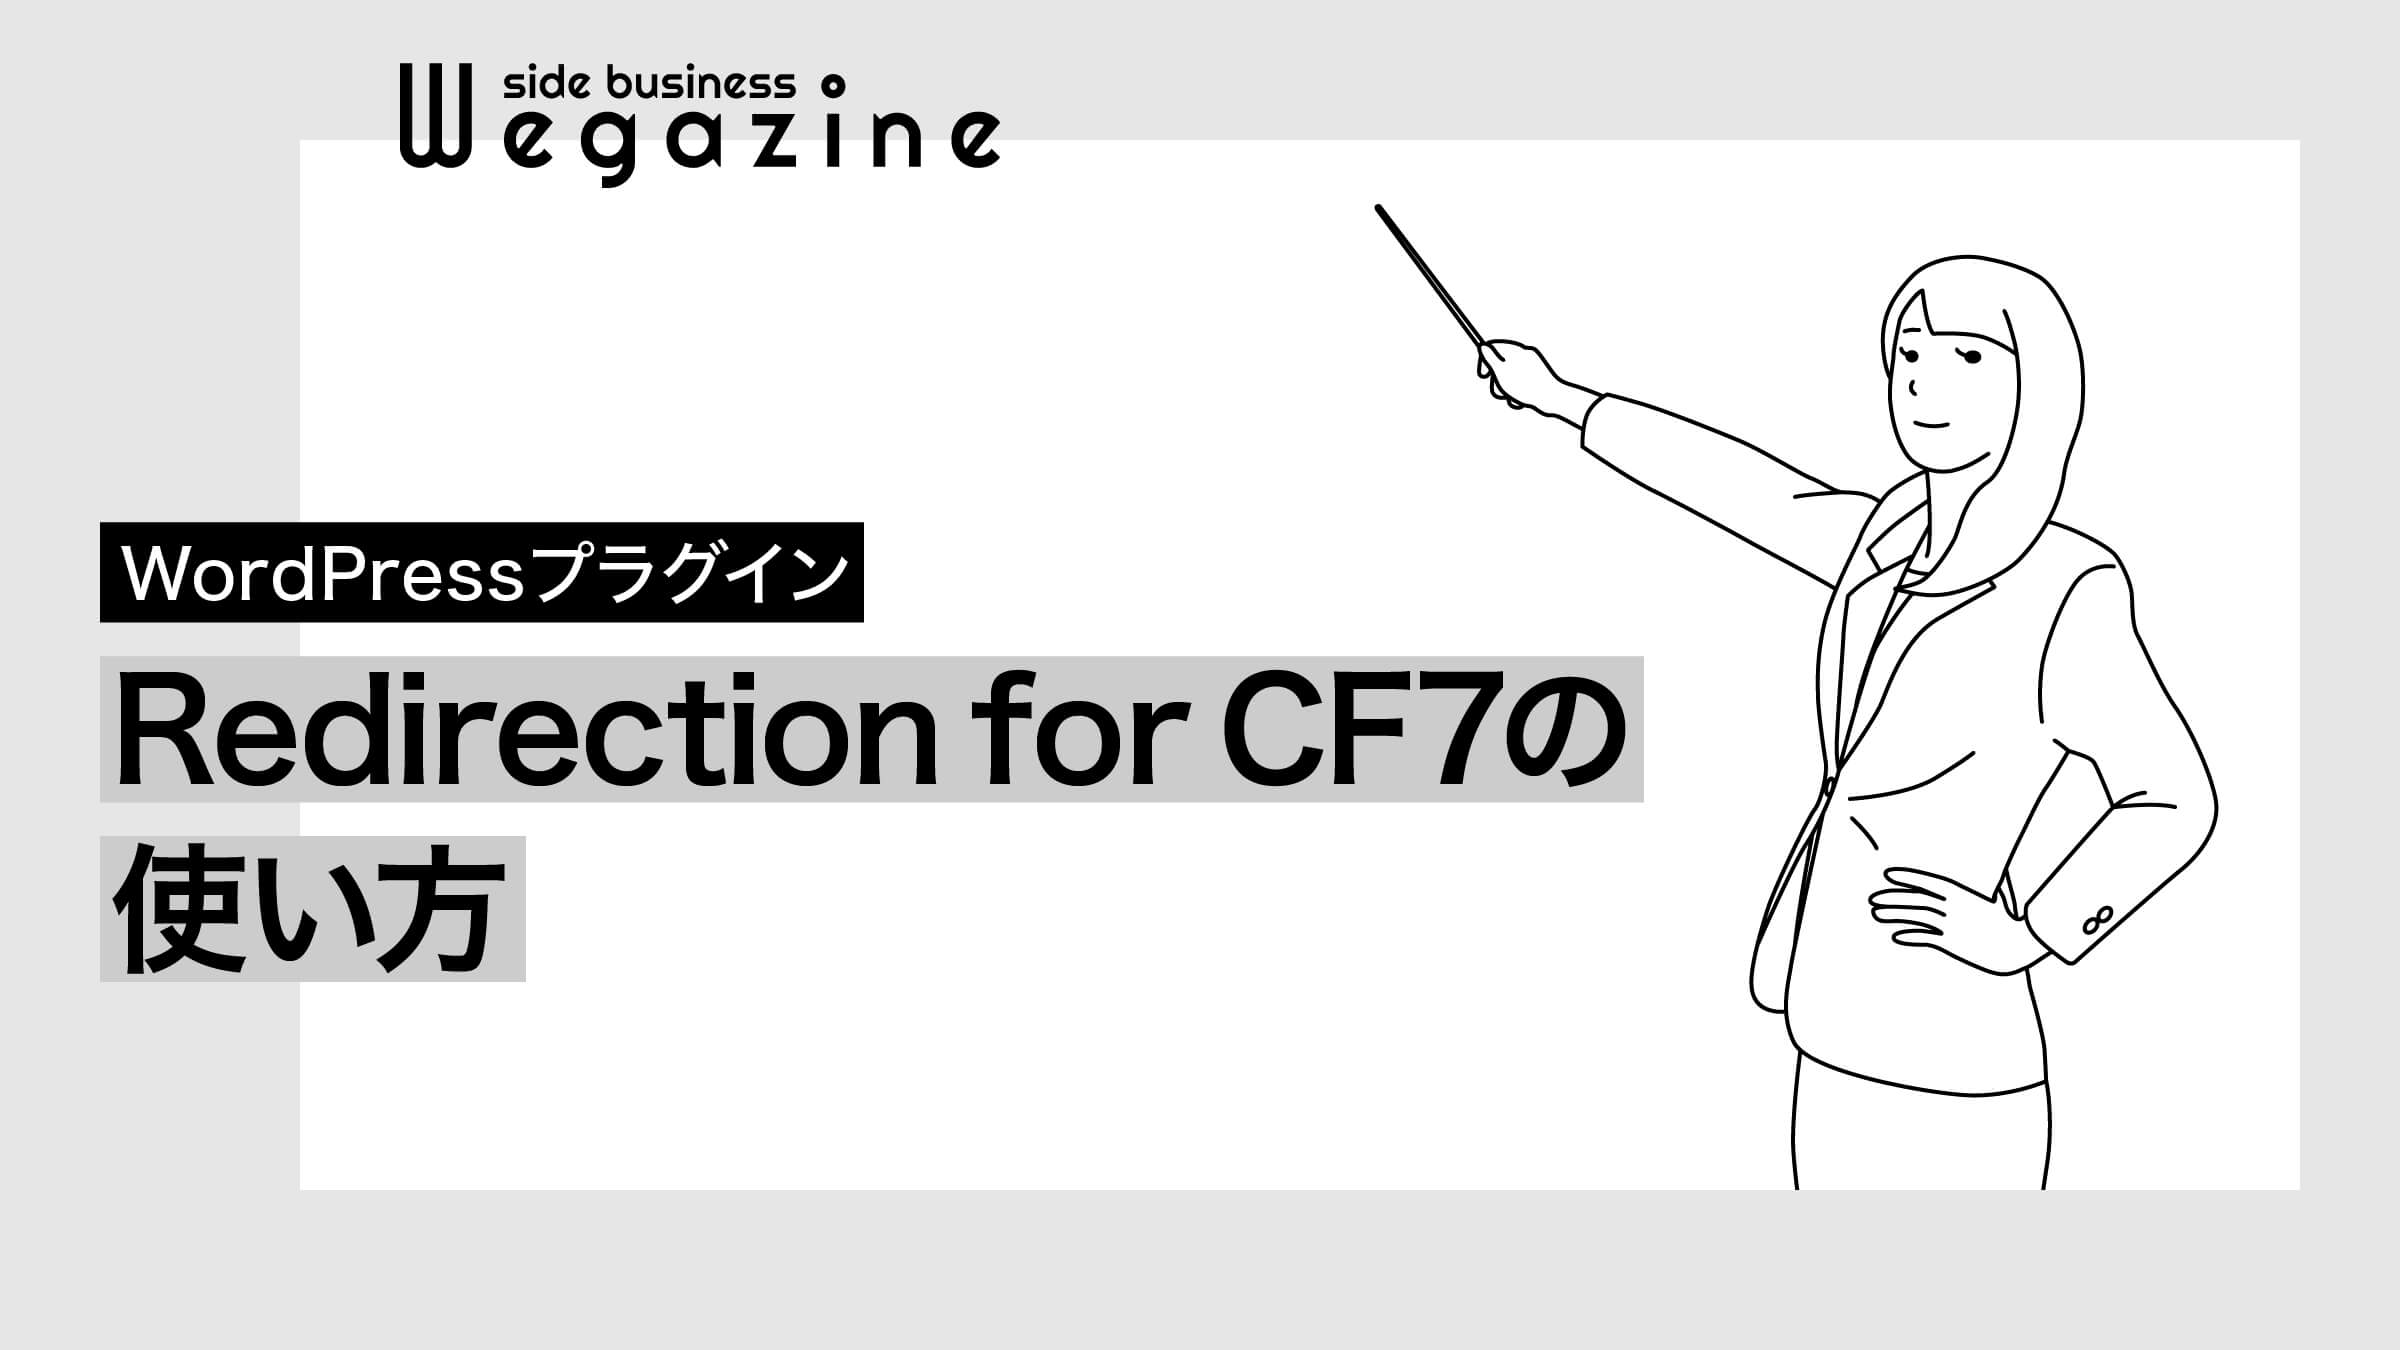 Redirection for Contact Form 7の使い方